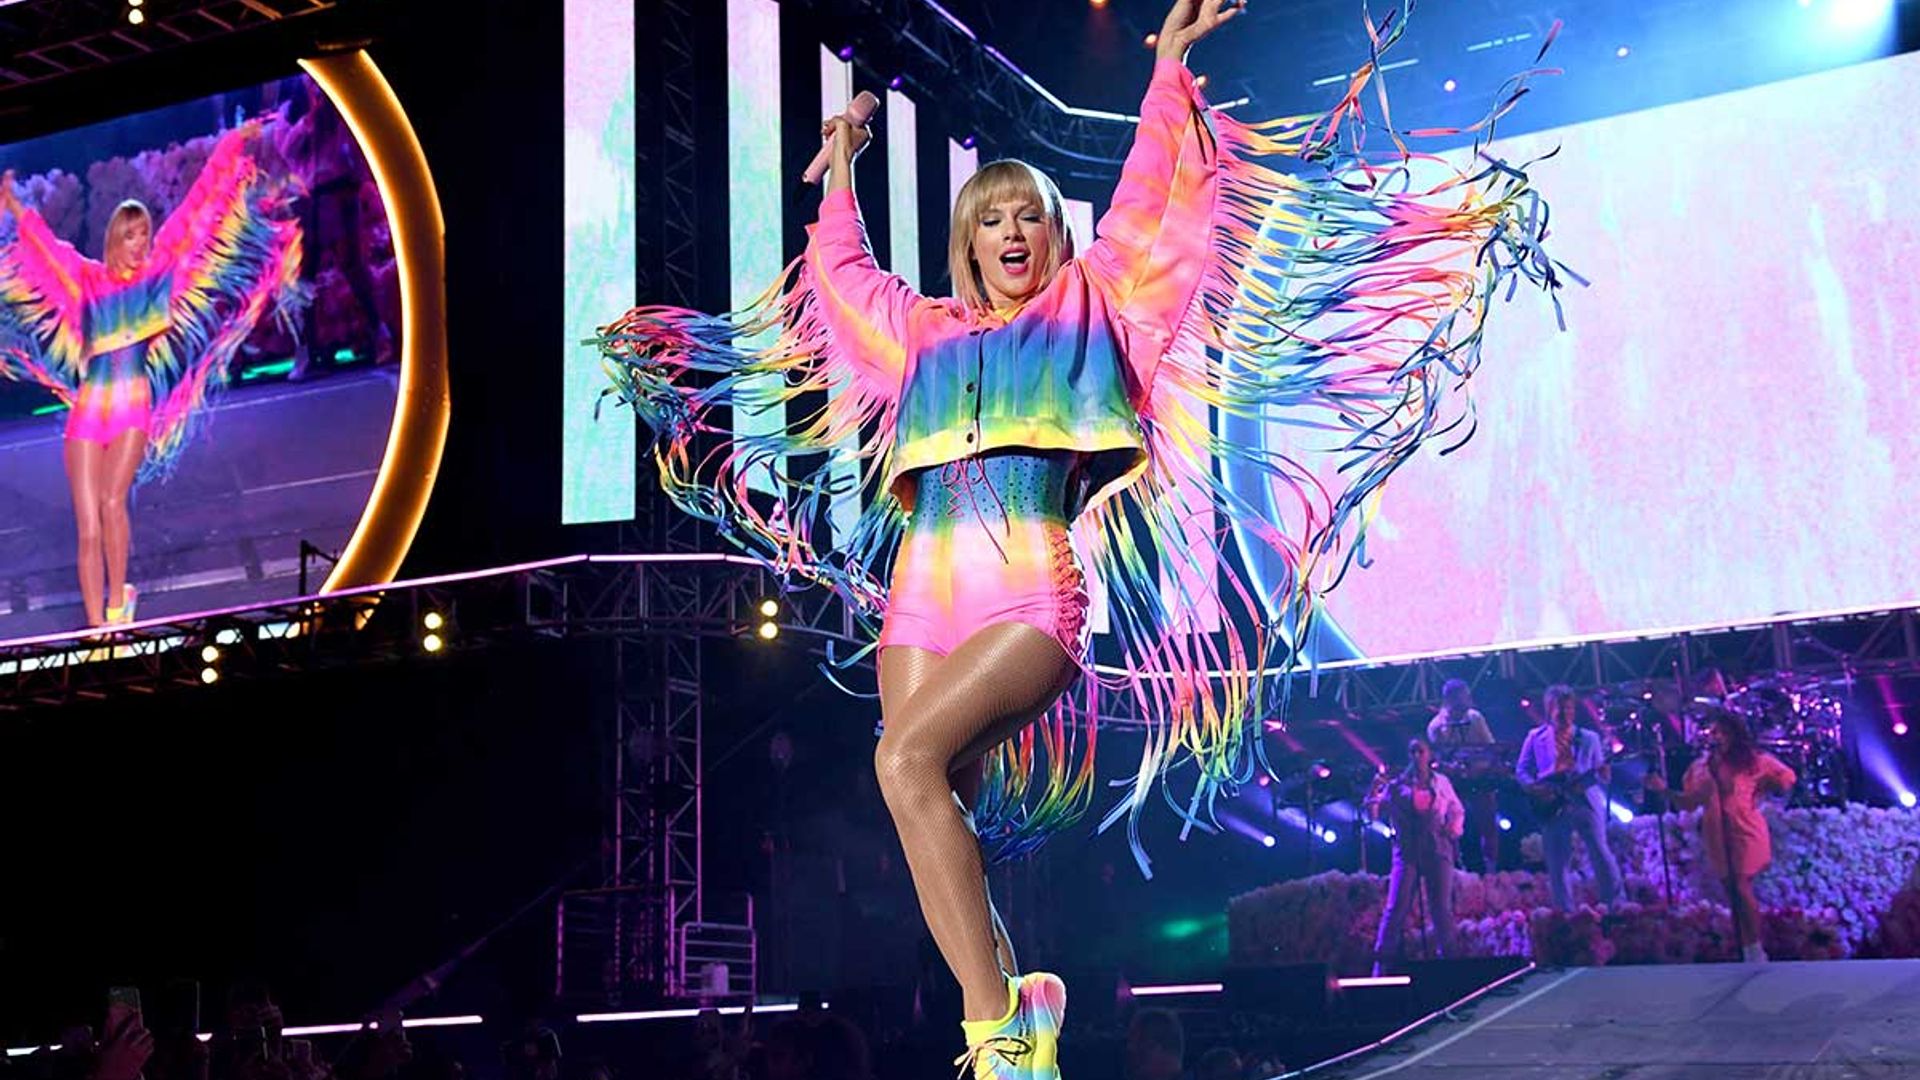 Taylor Swift releases new song and album release date - and it’s sooner than you might think!